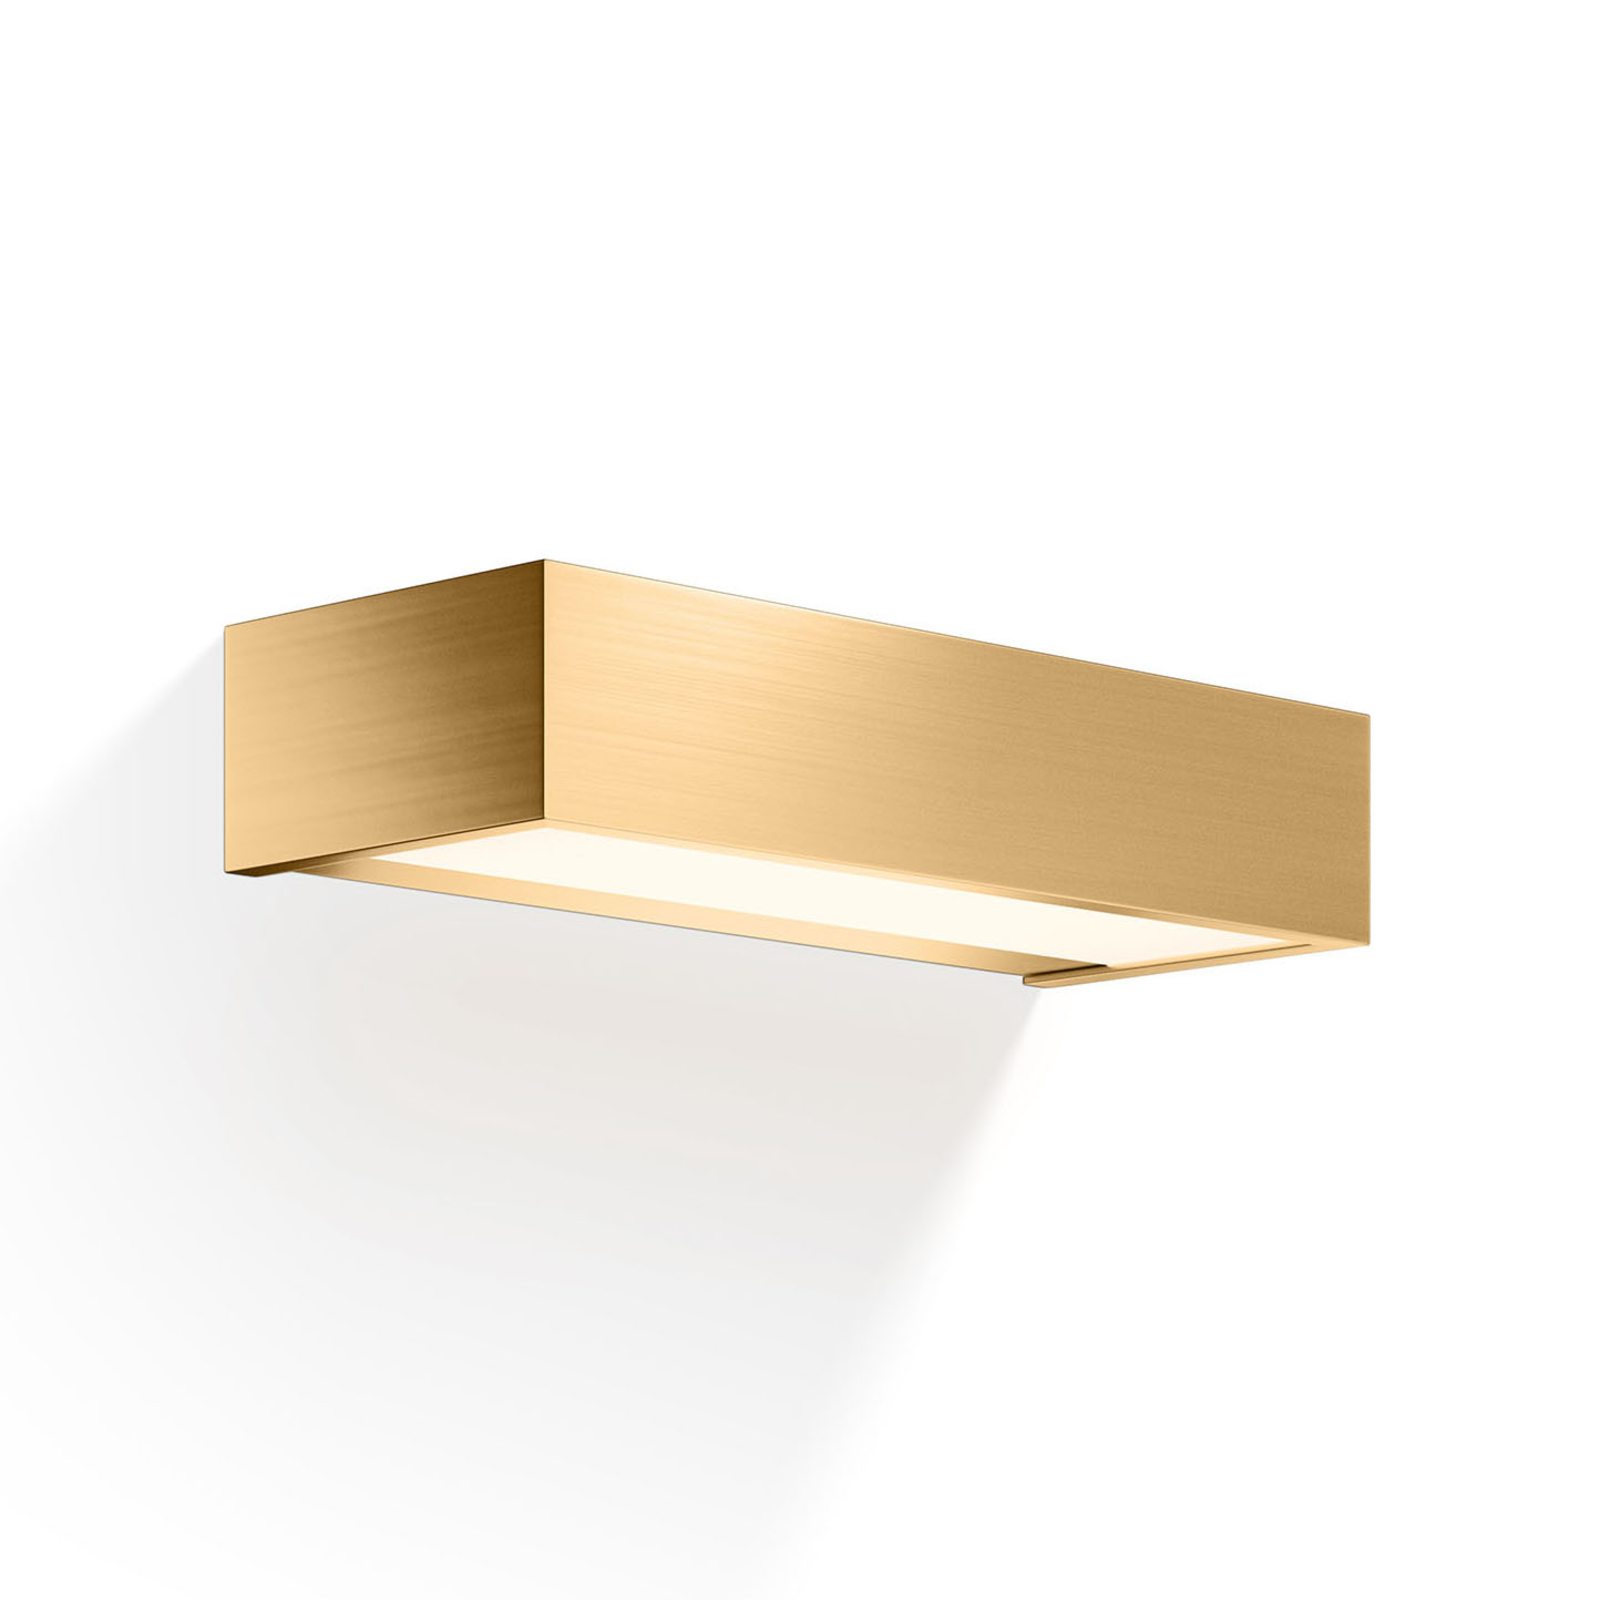 Decor Walther Box LED wall lamp gold 2,700K 25 cm